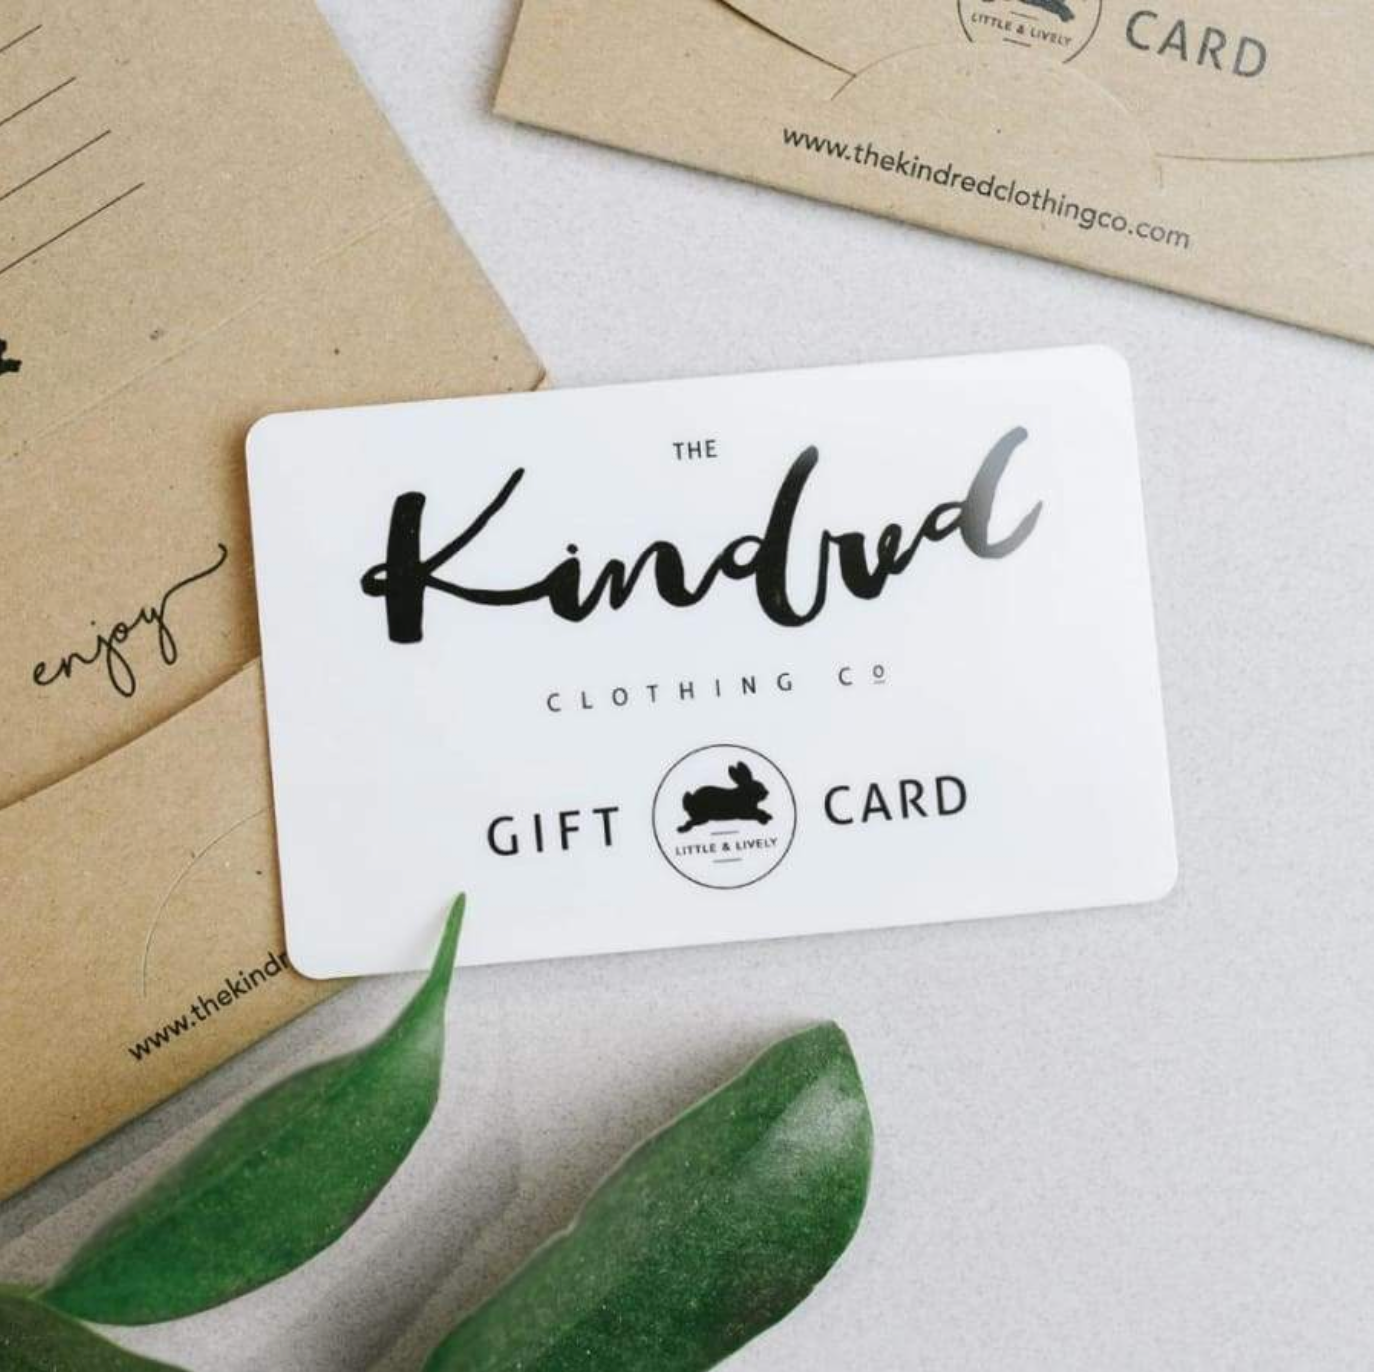 Physical Gift Card (mailed to you)